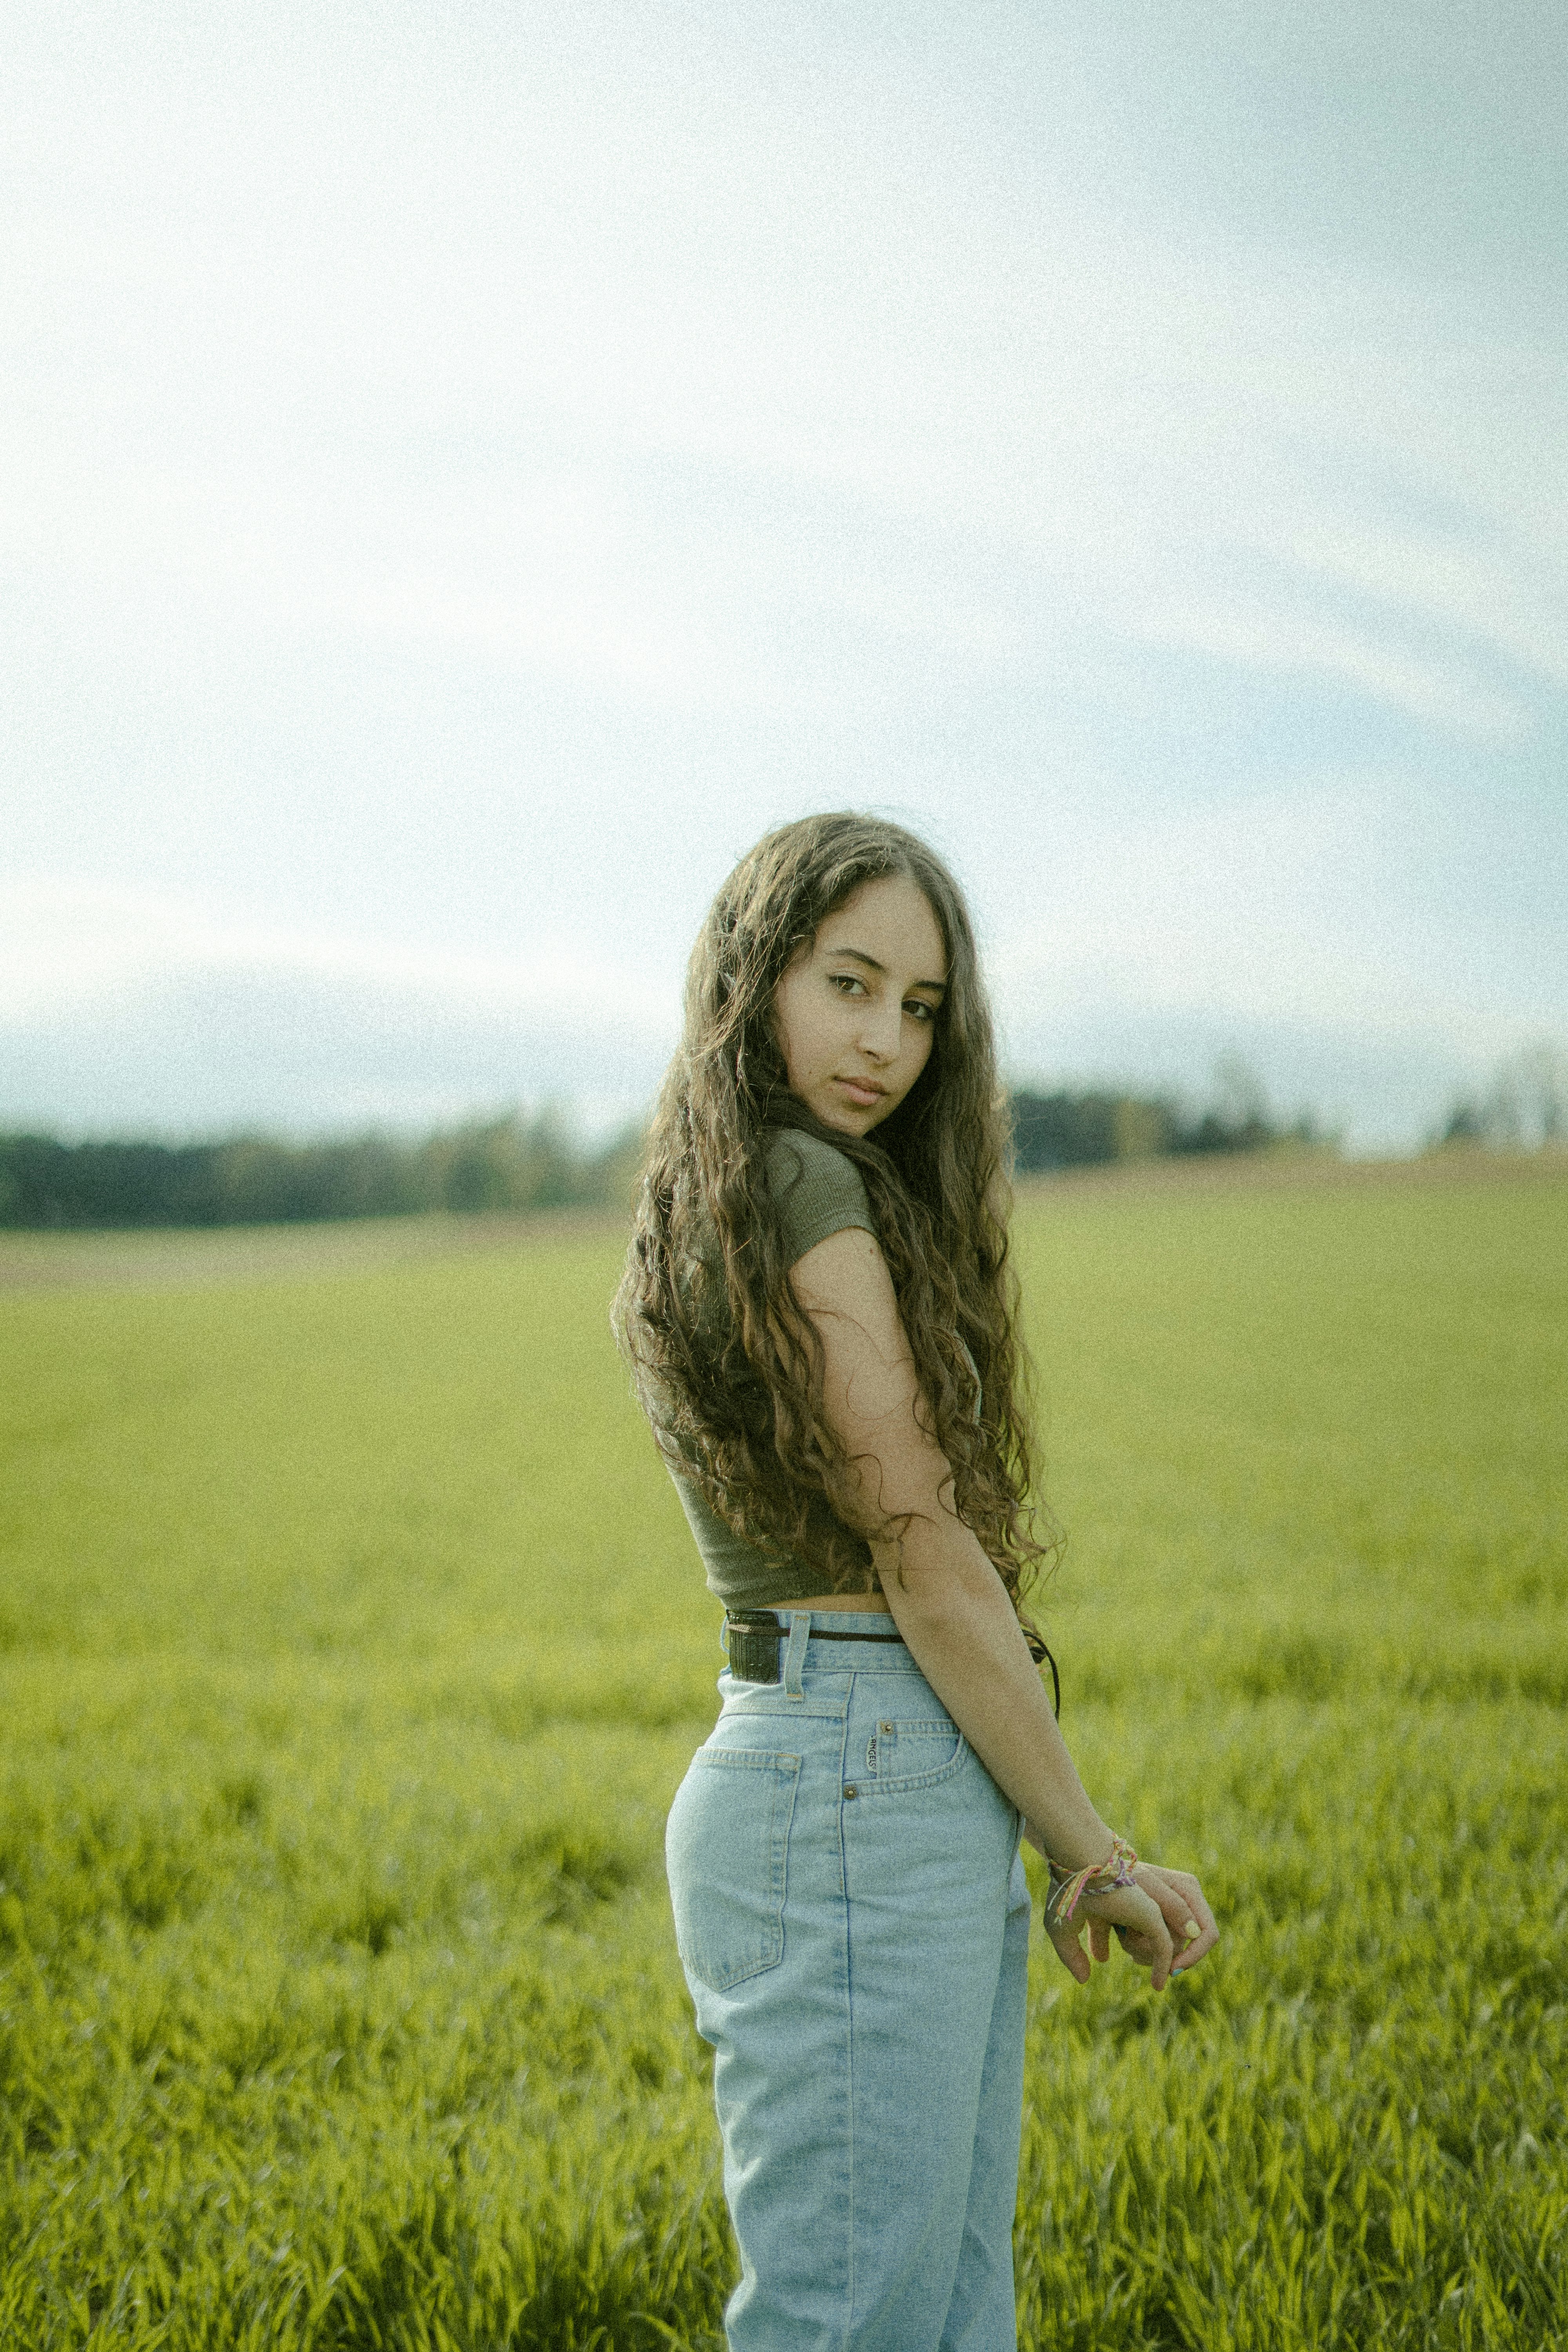 woman in brown tank top and blue denim jeans standing on green grass field during daytime